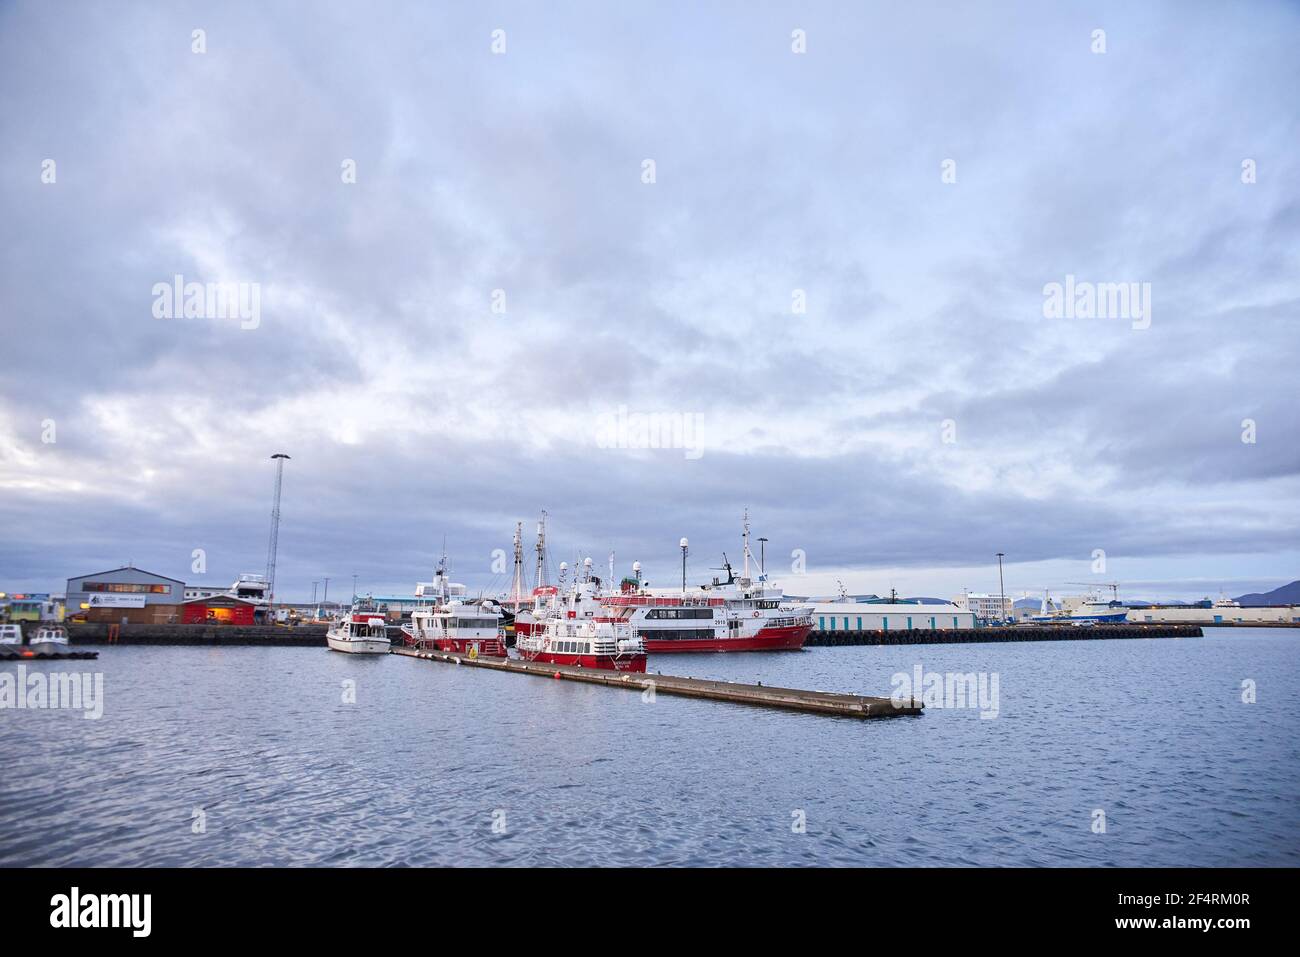 Reykjavik, Iceland - October 16, 2016: Many different boats and ships in the port of the city Stock Photo